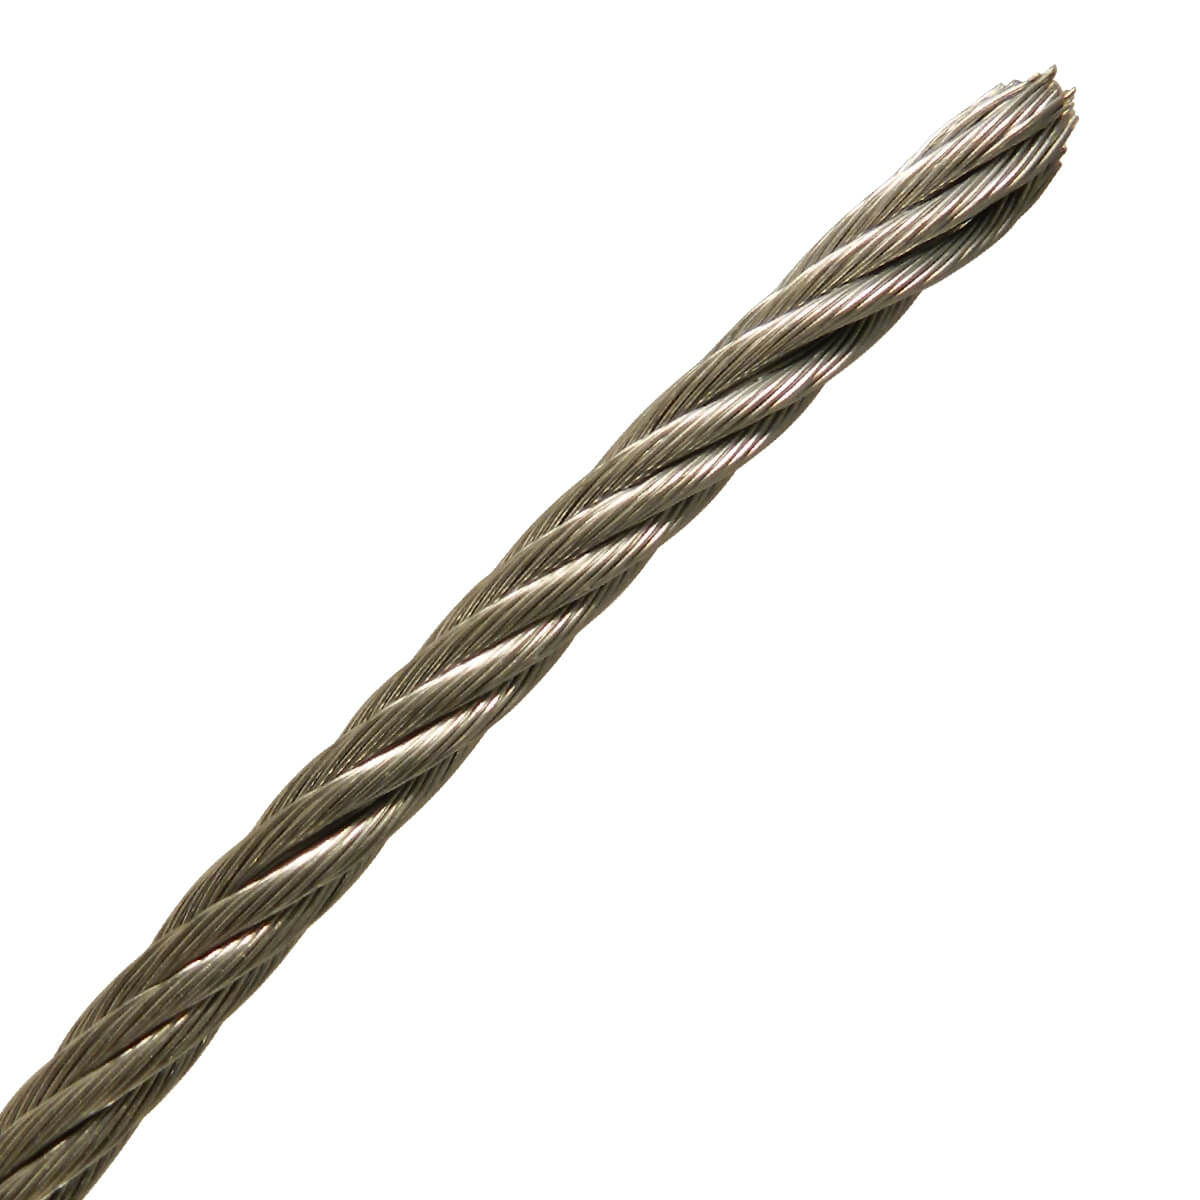 Cable 7 x 7 - 3/16-in - Price / ft